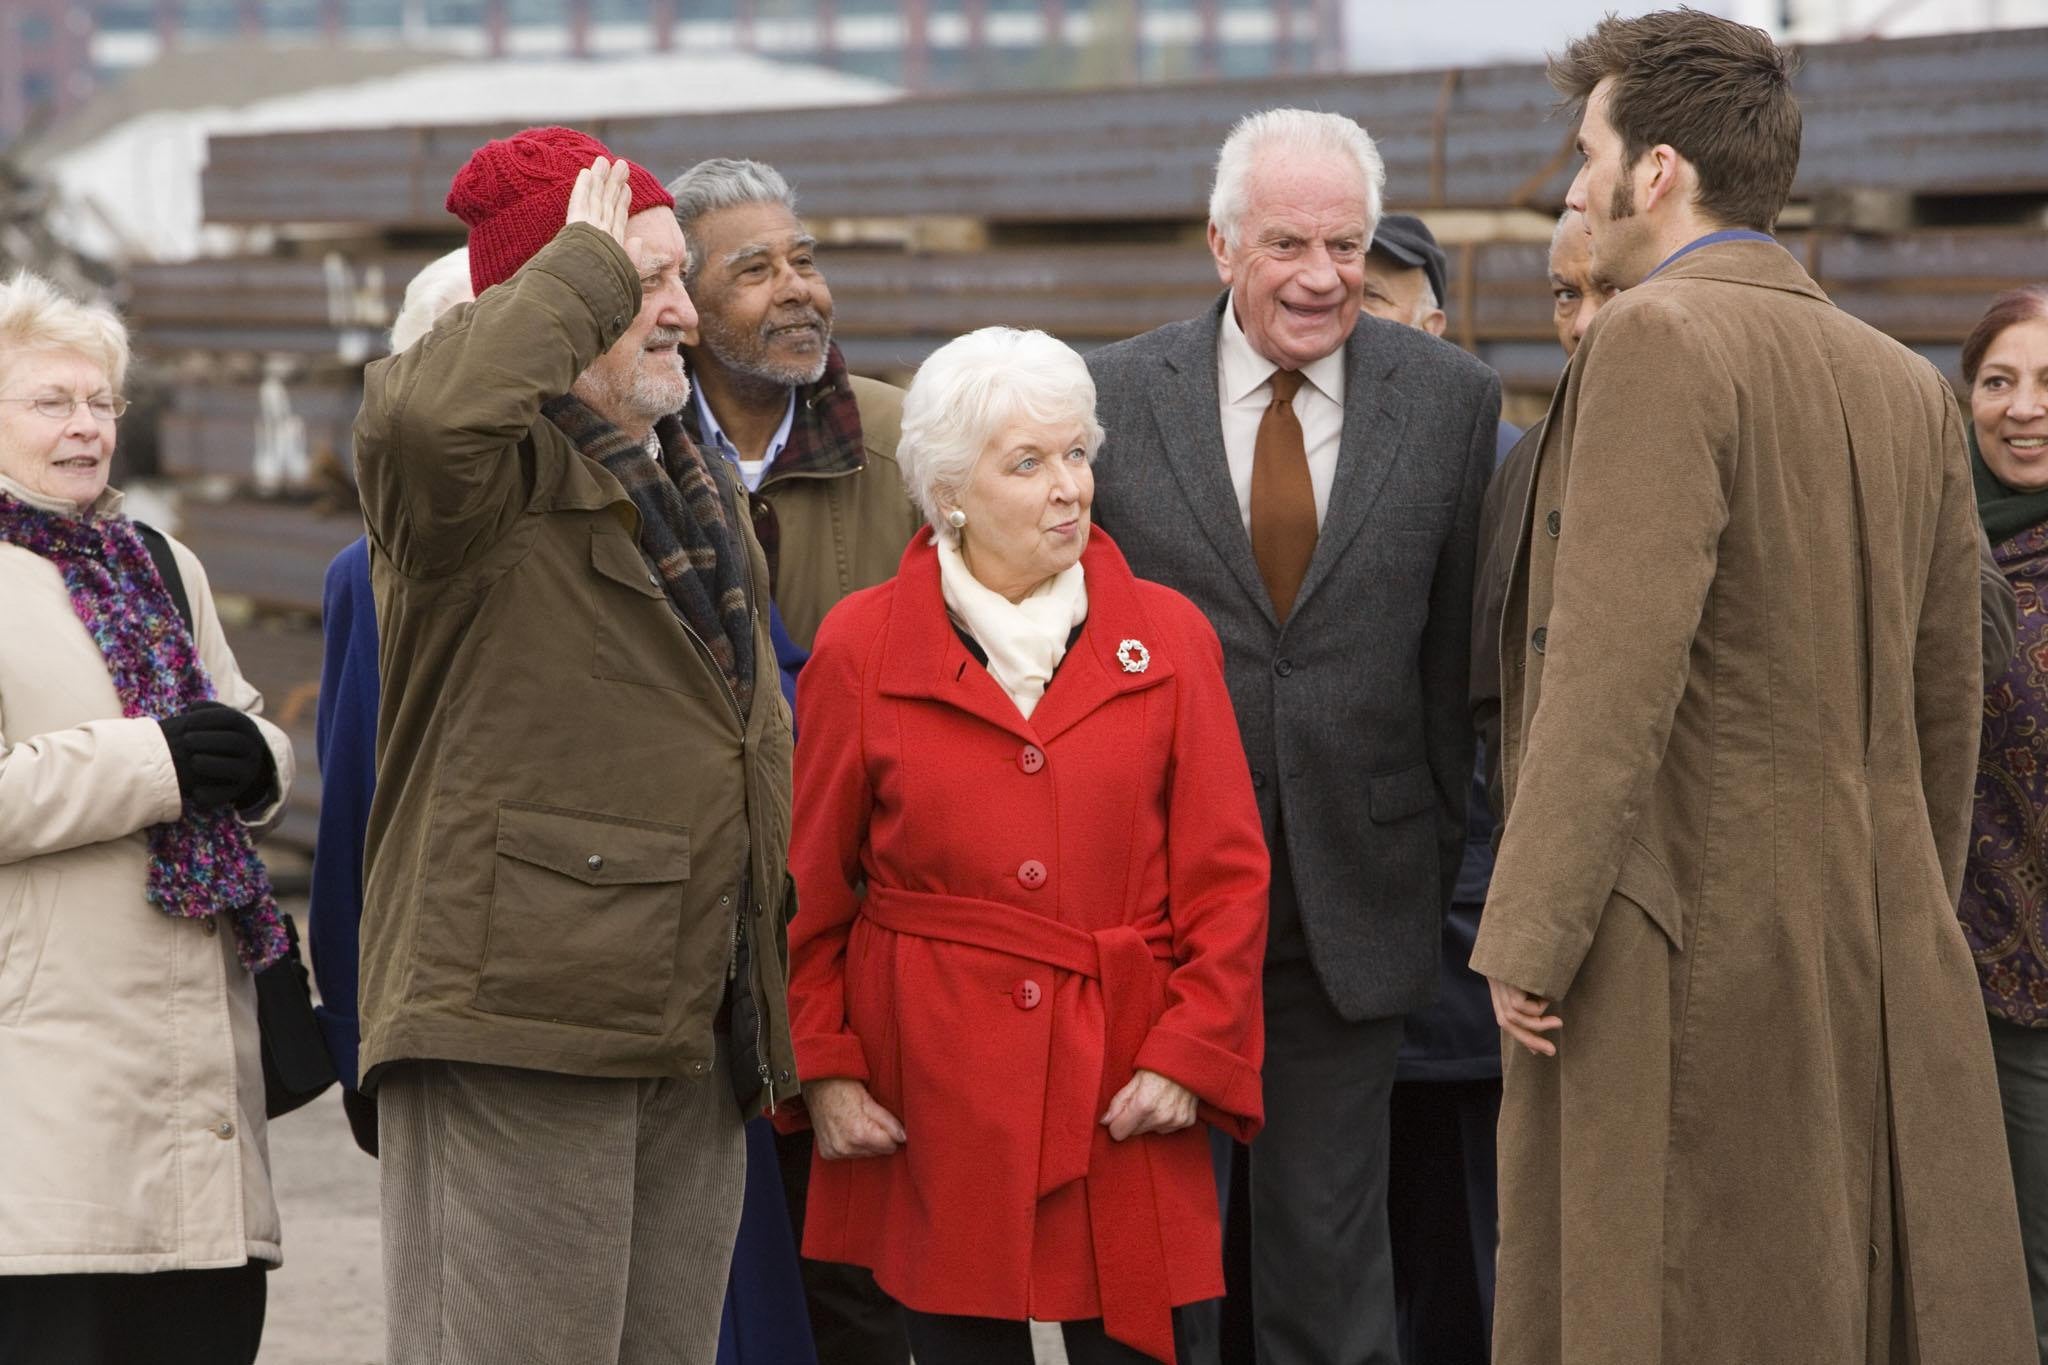 Cribbins alongside June Whitfield, Barry Howard and David Tennant in a scene from ‘Doctor Who’